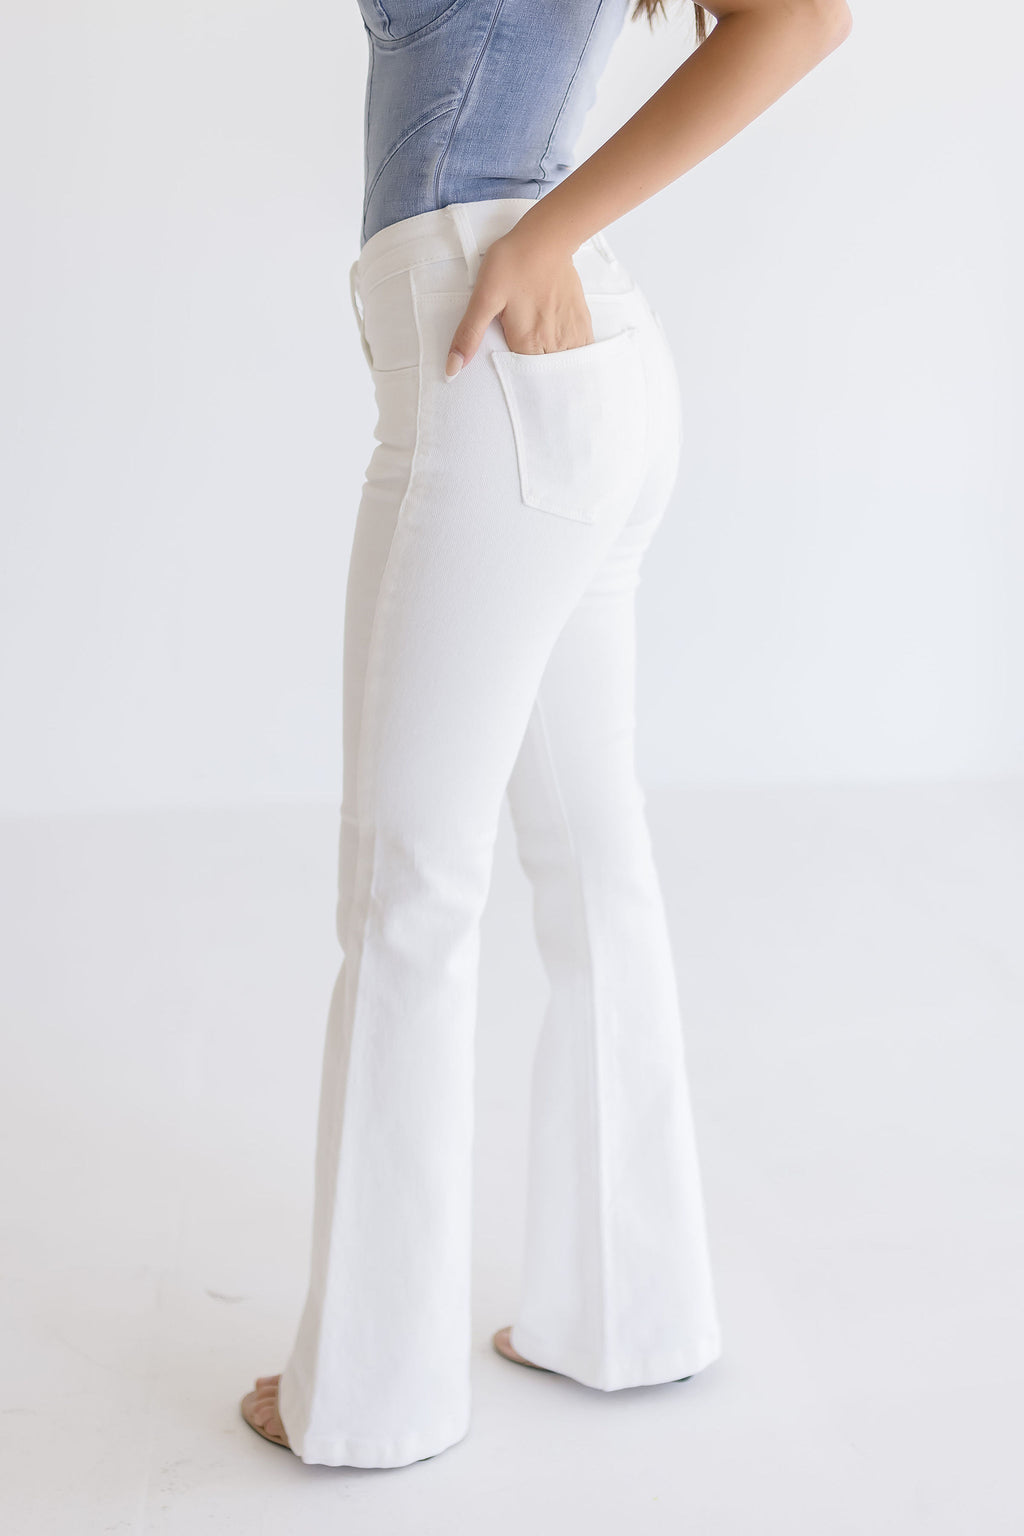  Low Rise Flare Leg Jeans White